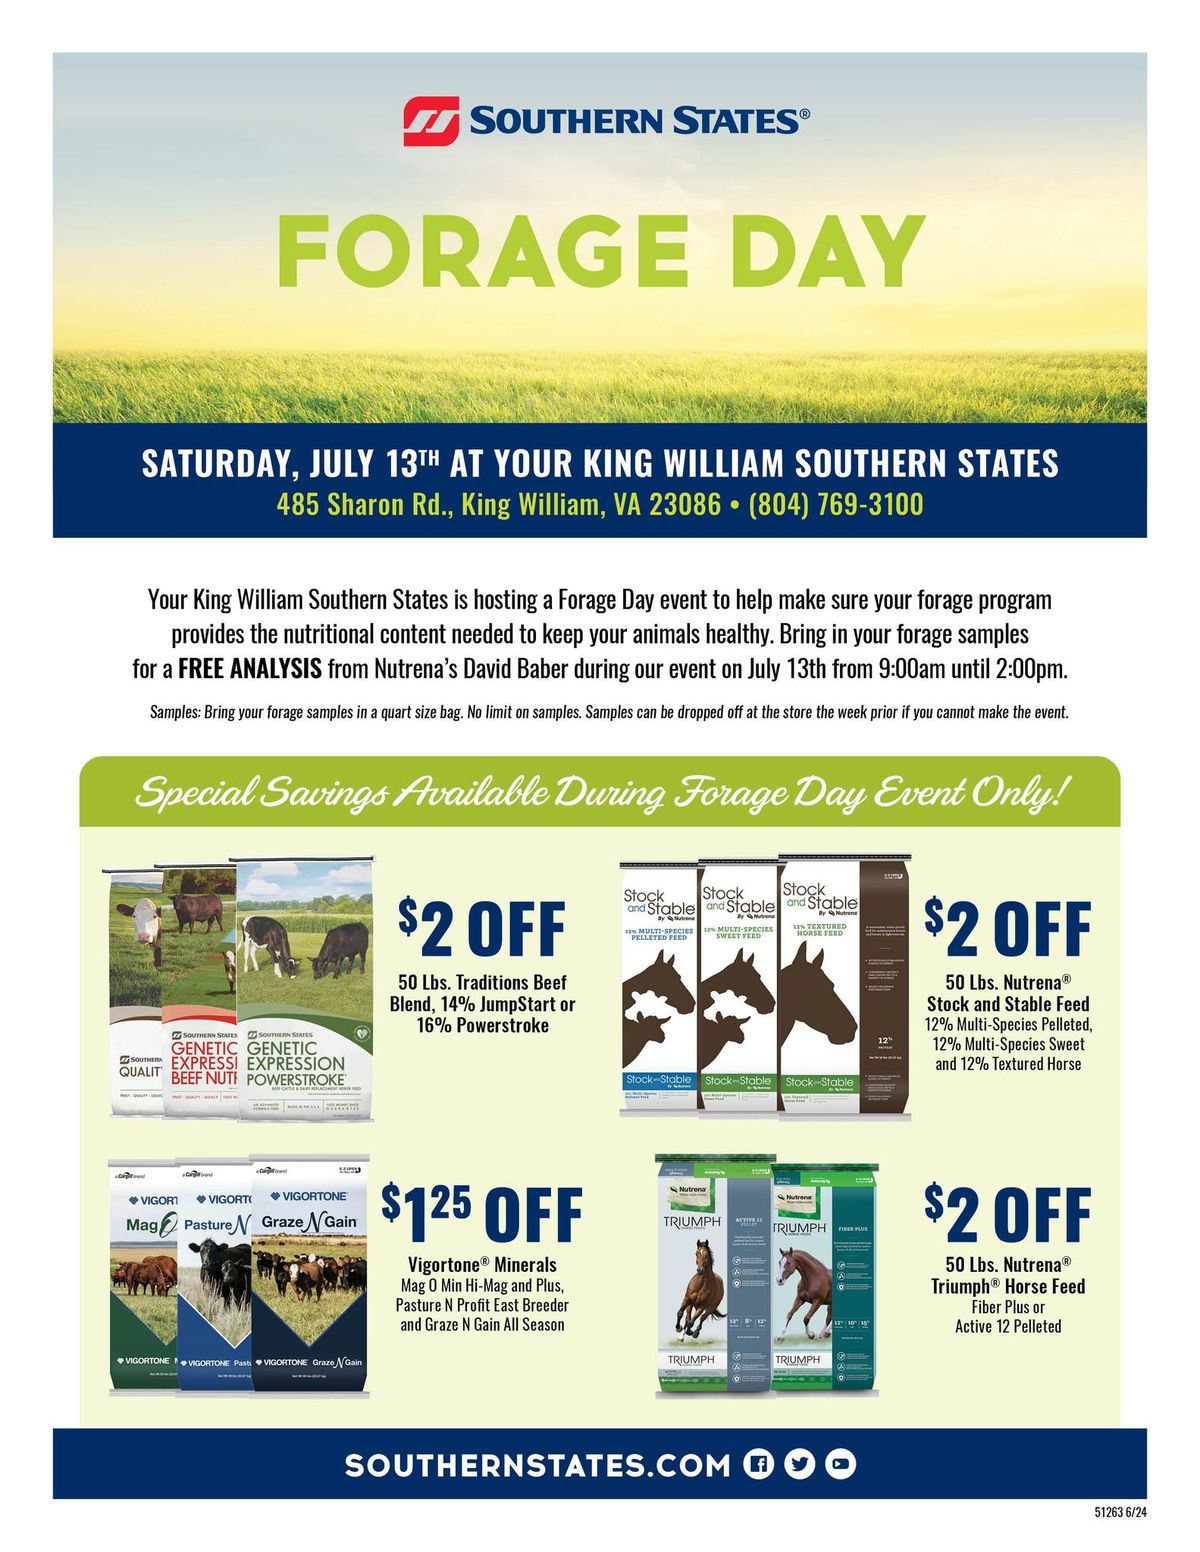 Forage Day at Southern States King William